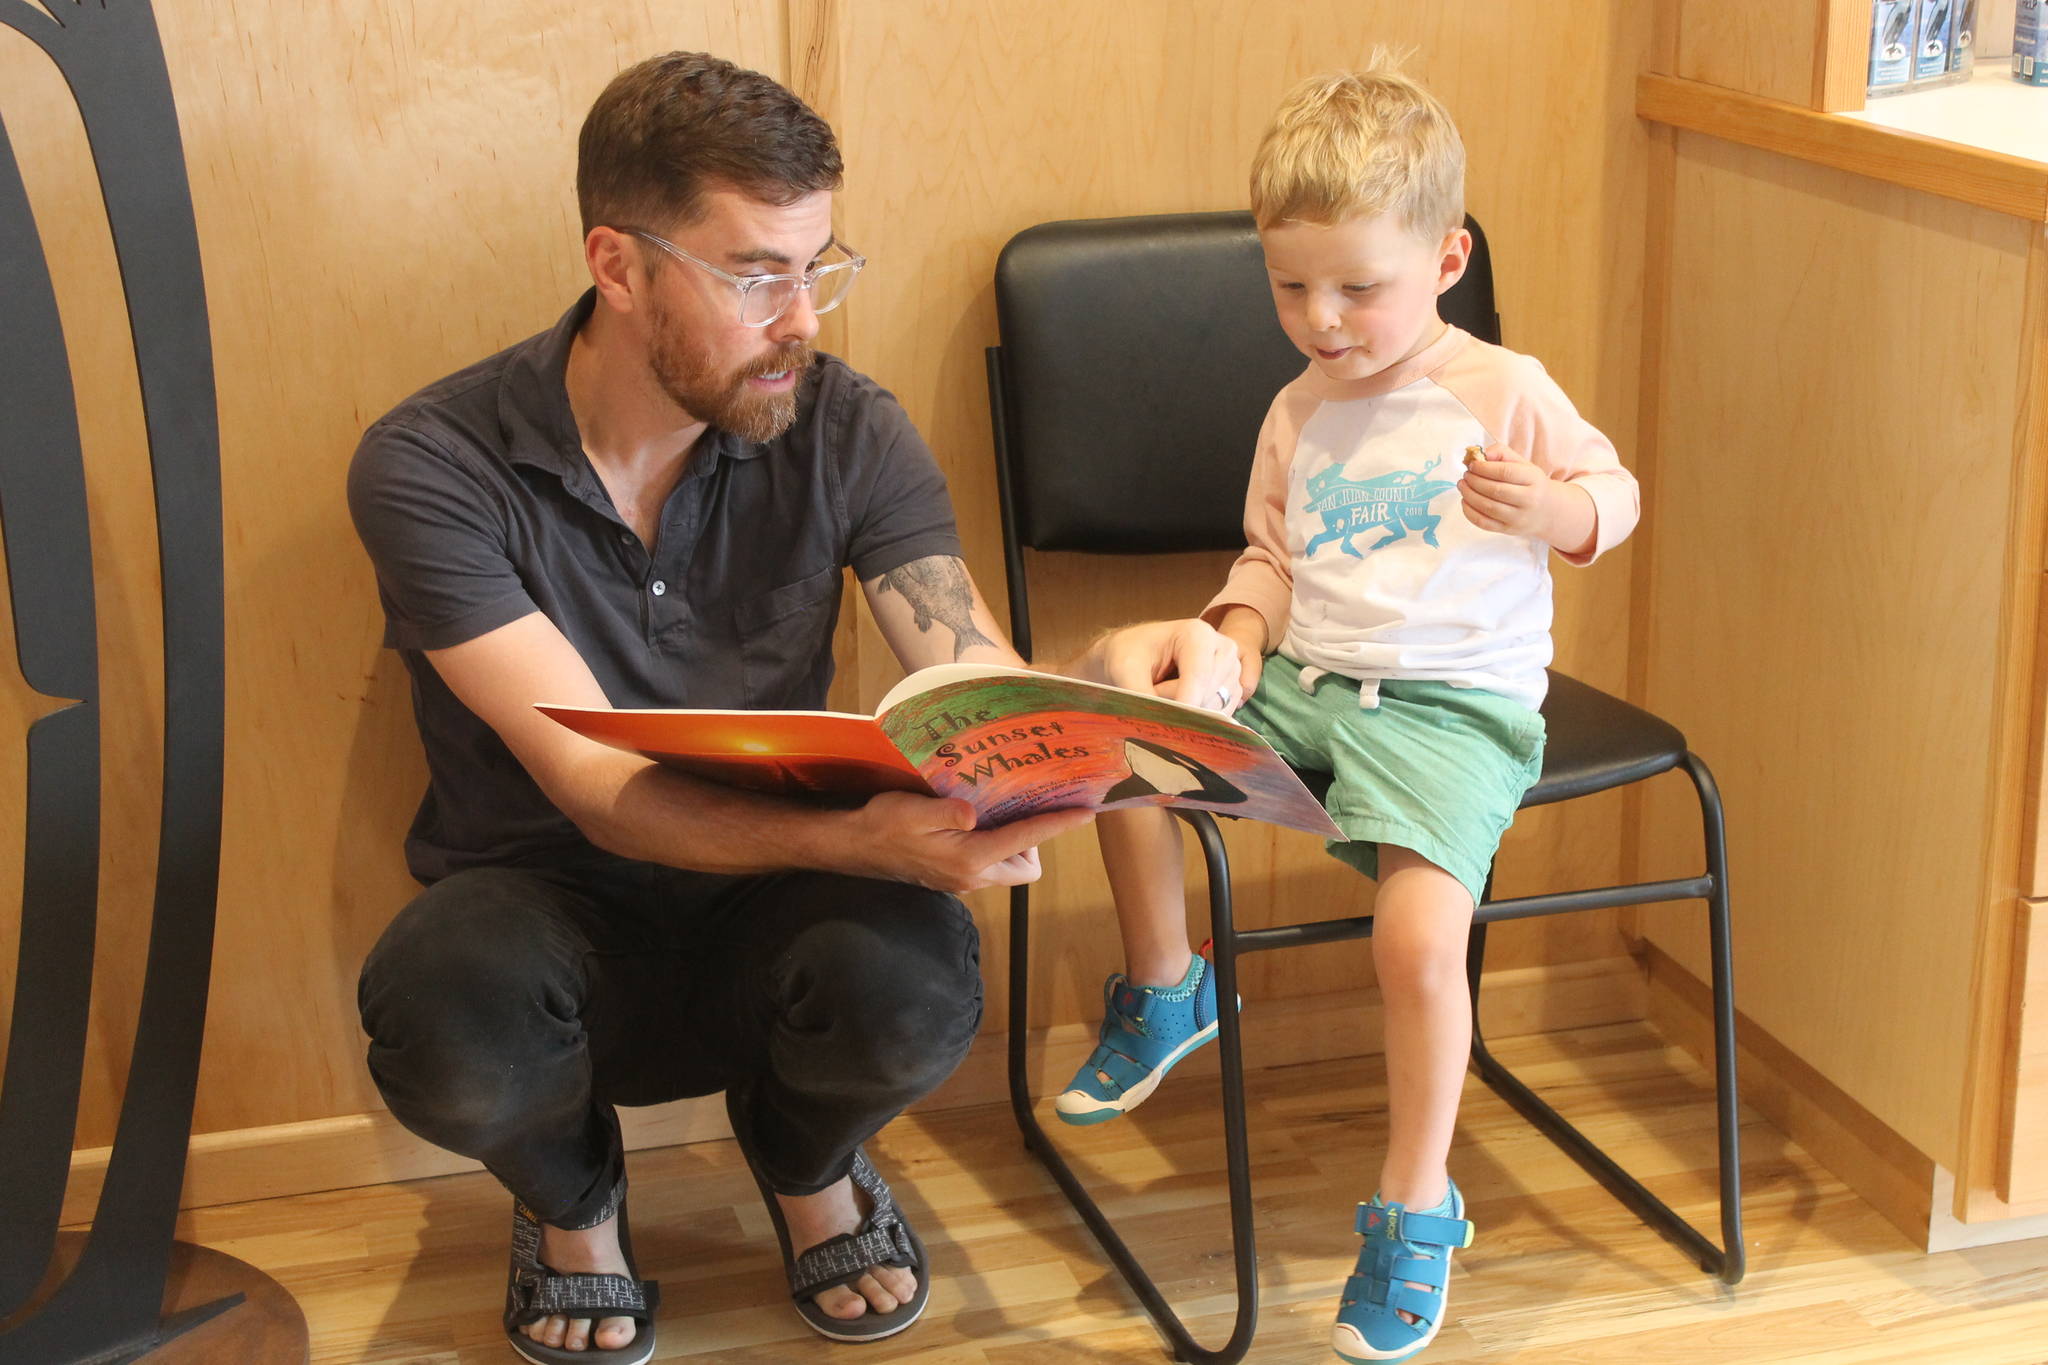 Staff photo/Heather Spaulding. A visitor and his son look at a children’s book.